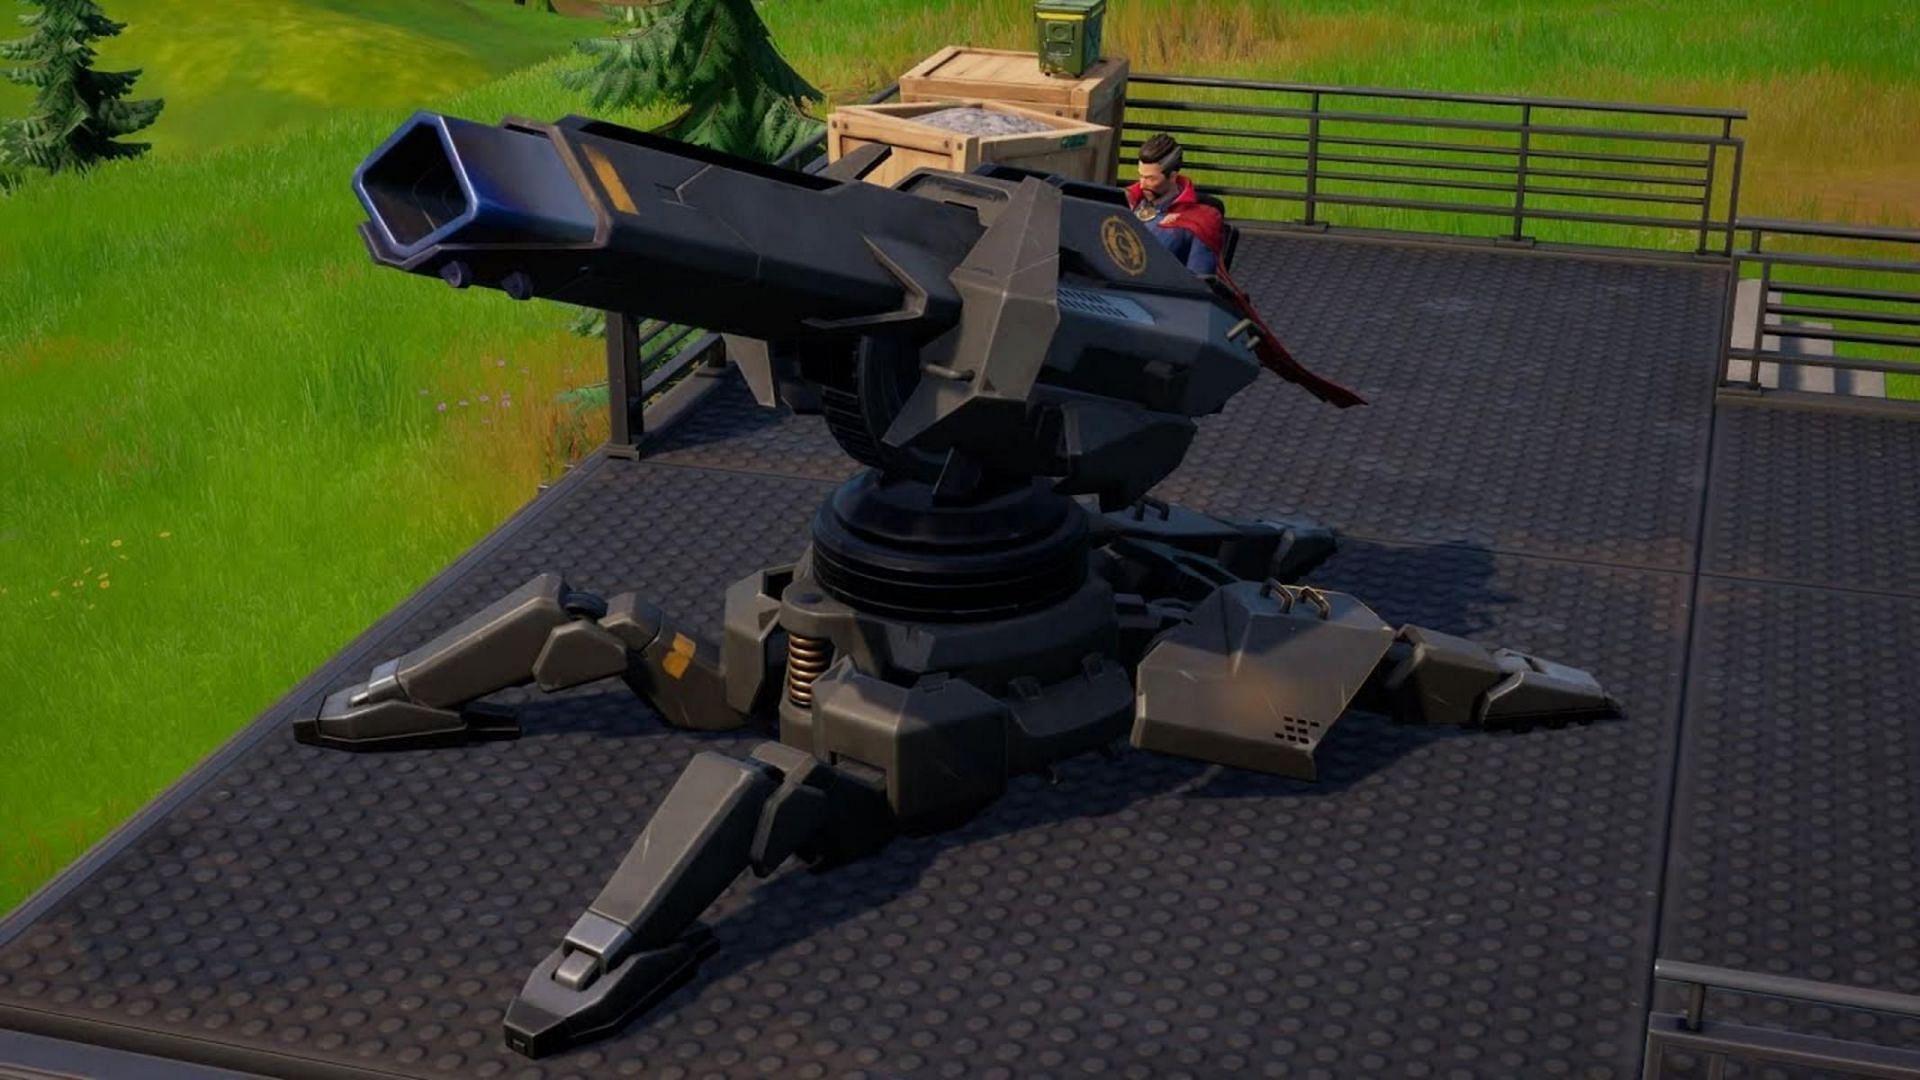 A fortnite player uses a Siege Cannon to get a Victory Royale (Image via Sportskeeda)